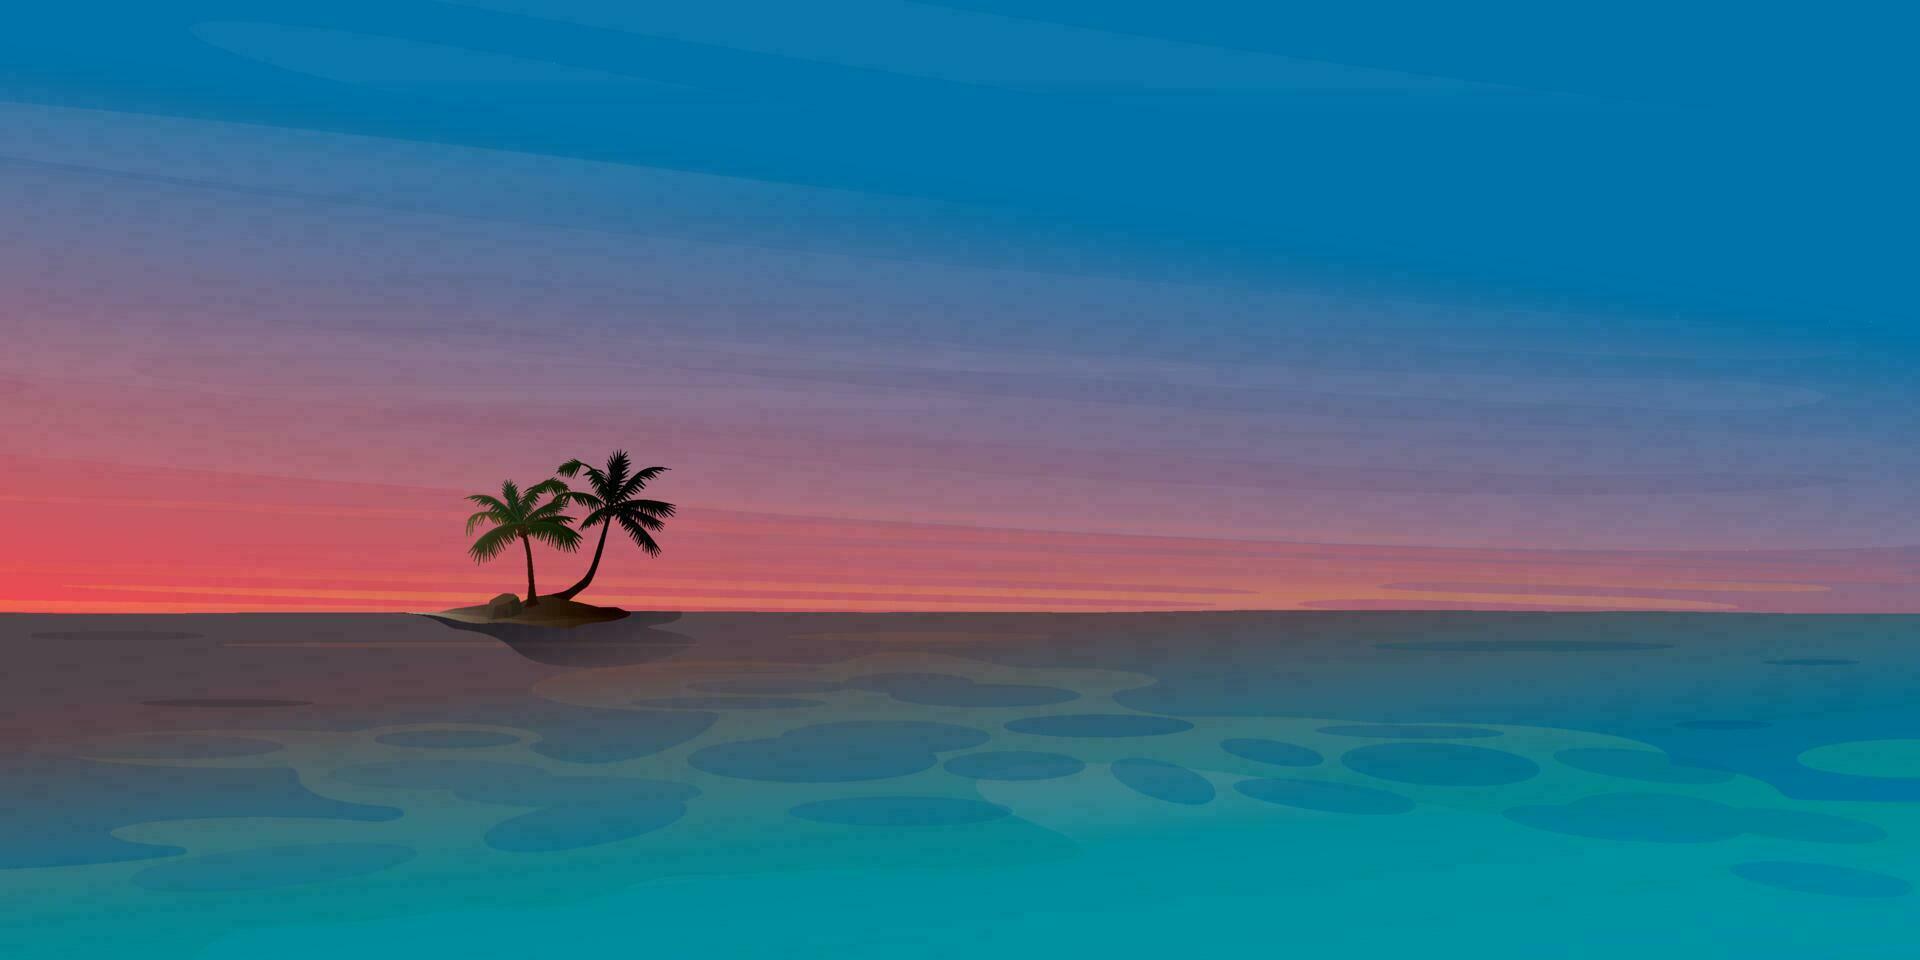 Sunset at the ocean with small tropical island and palm trees flat design. Travel concept vector illustration background.